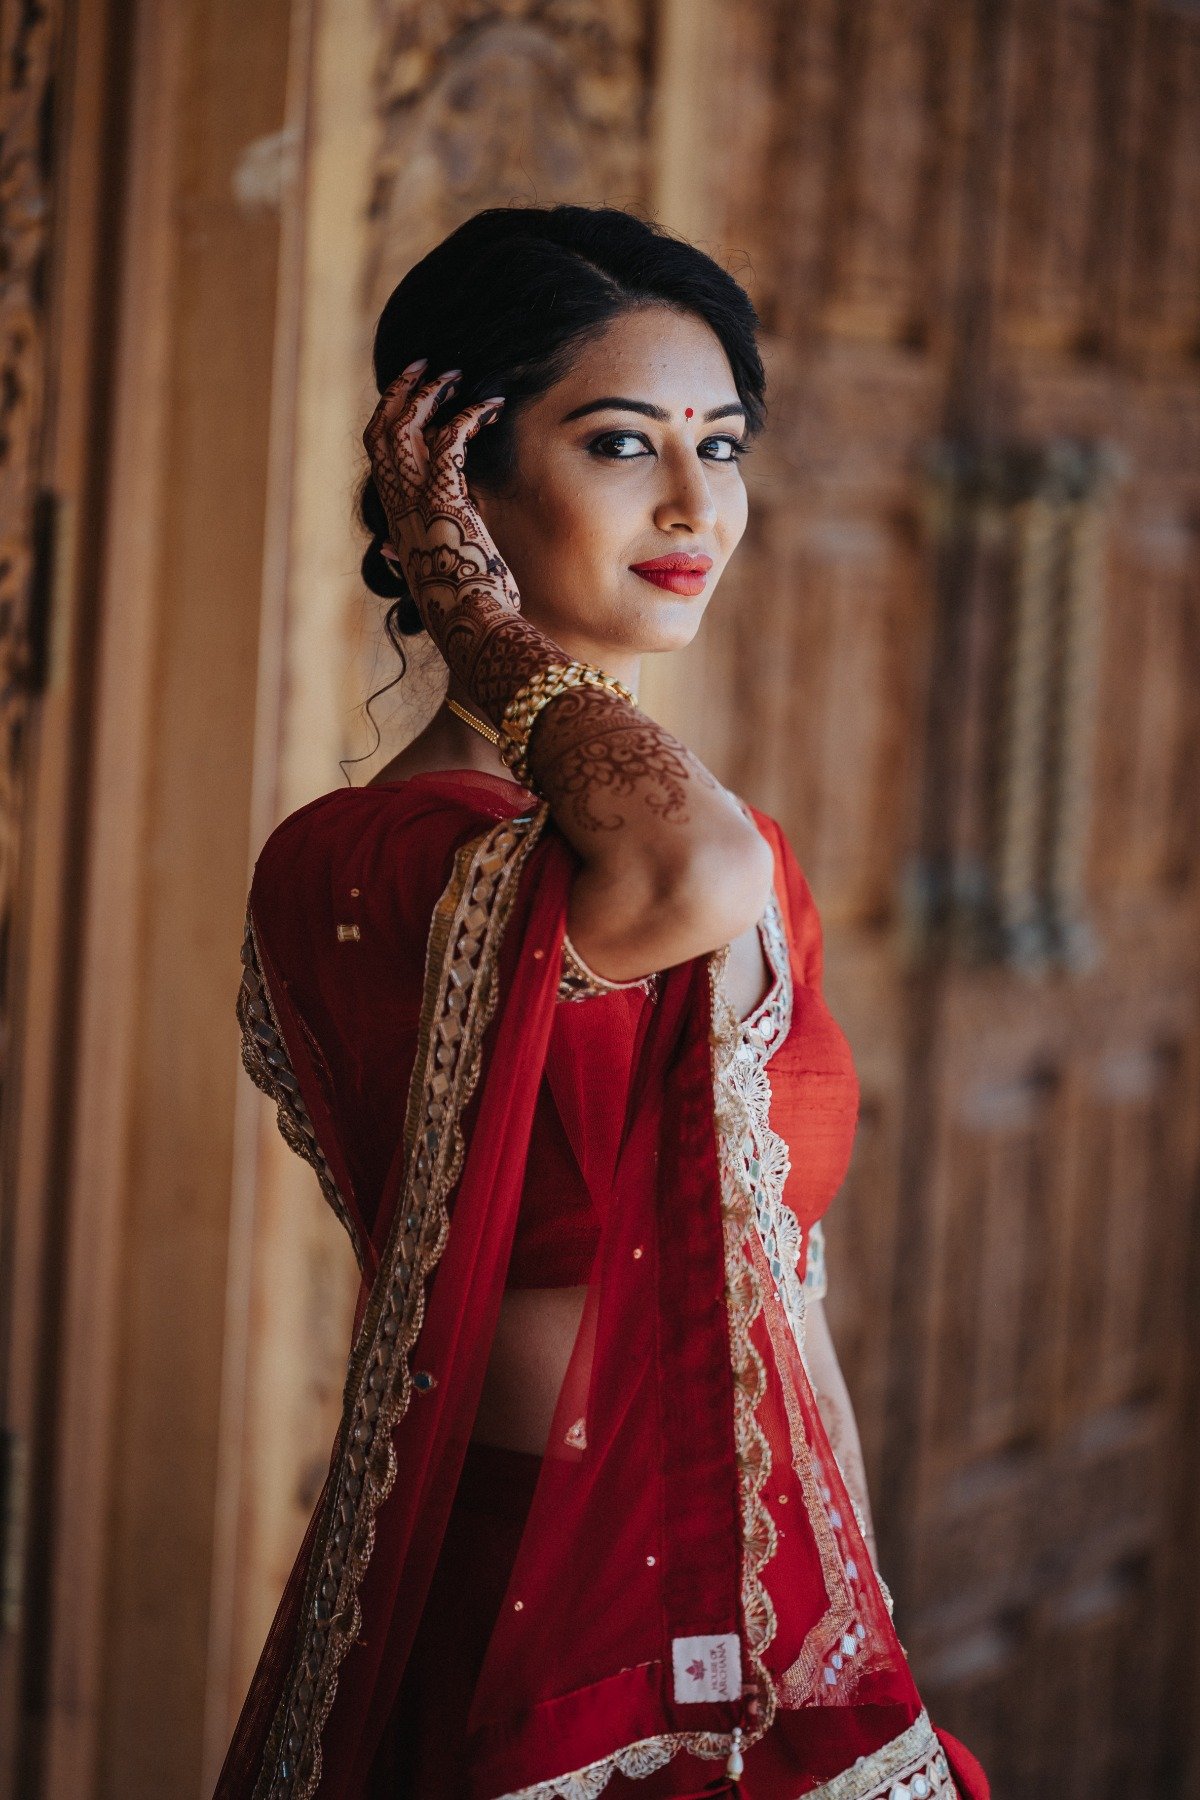 Bride holding hand with henna up to ear in traditional red dress